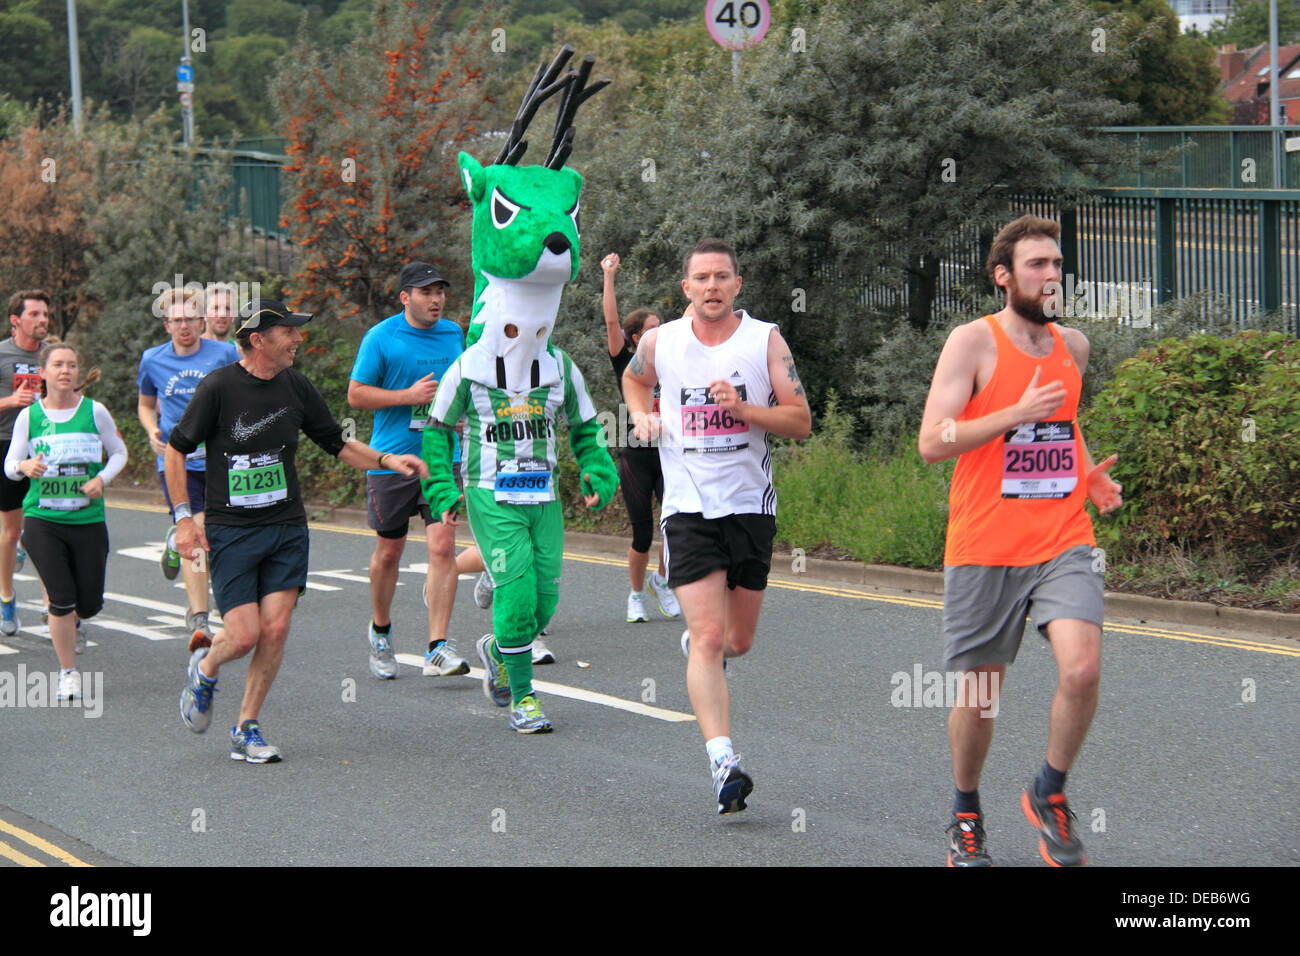 25th Bristol Half Marathon. Sunday 15th September 2013. Deer fancy dress runner. Up to 20,000 participants took part in this increasingly popular national and international running event which features top athletes as well as fun-runners and charity fundraisers. Credit:  Ian Bottle/Alamy Live News Stock Photo